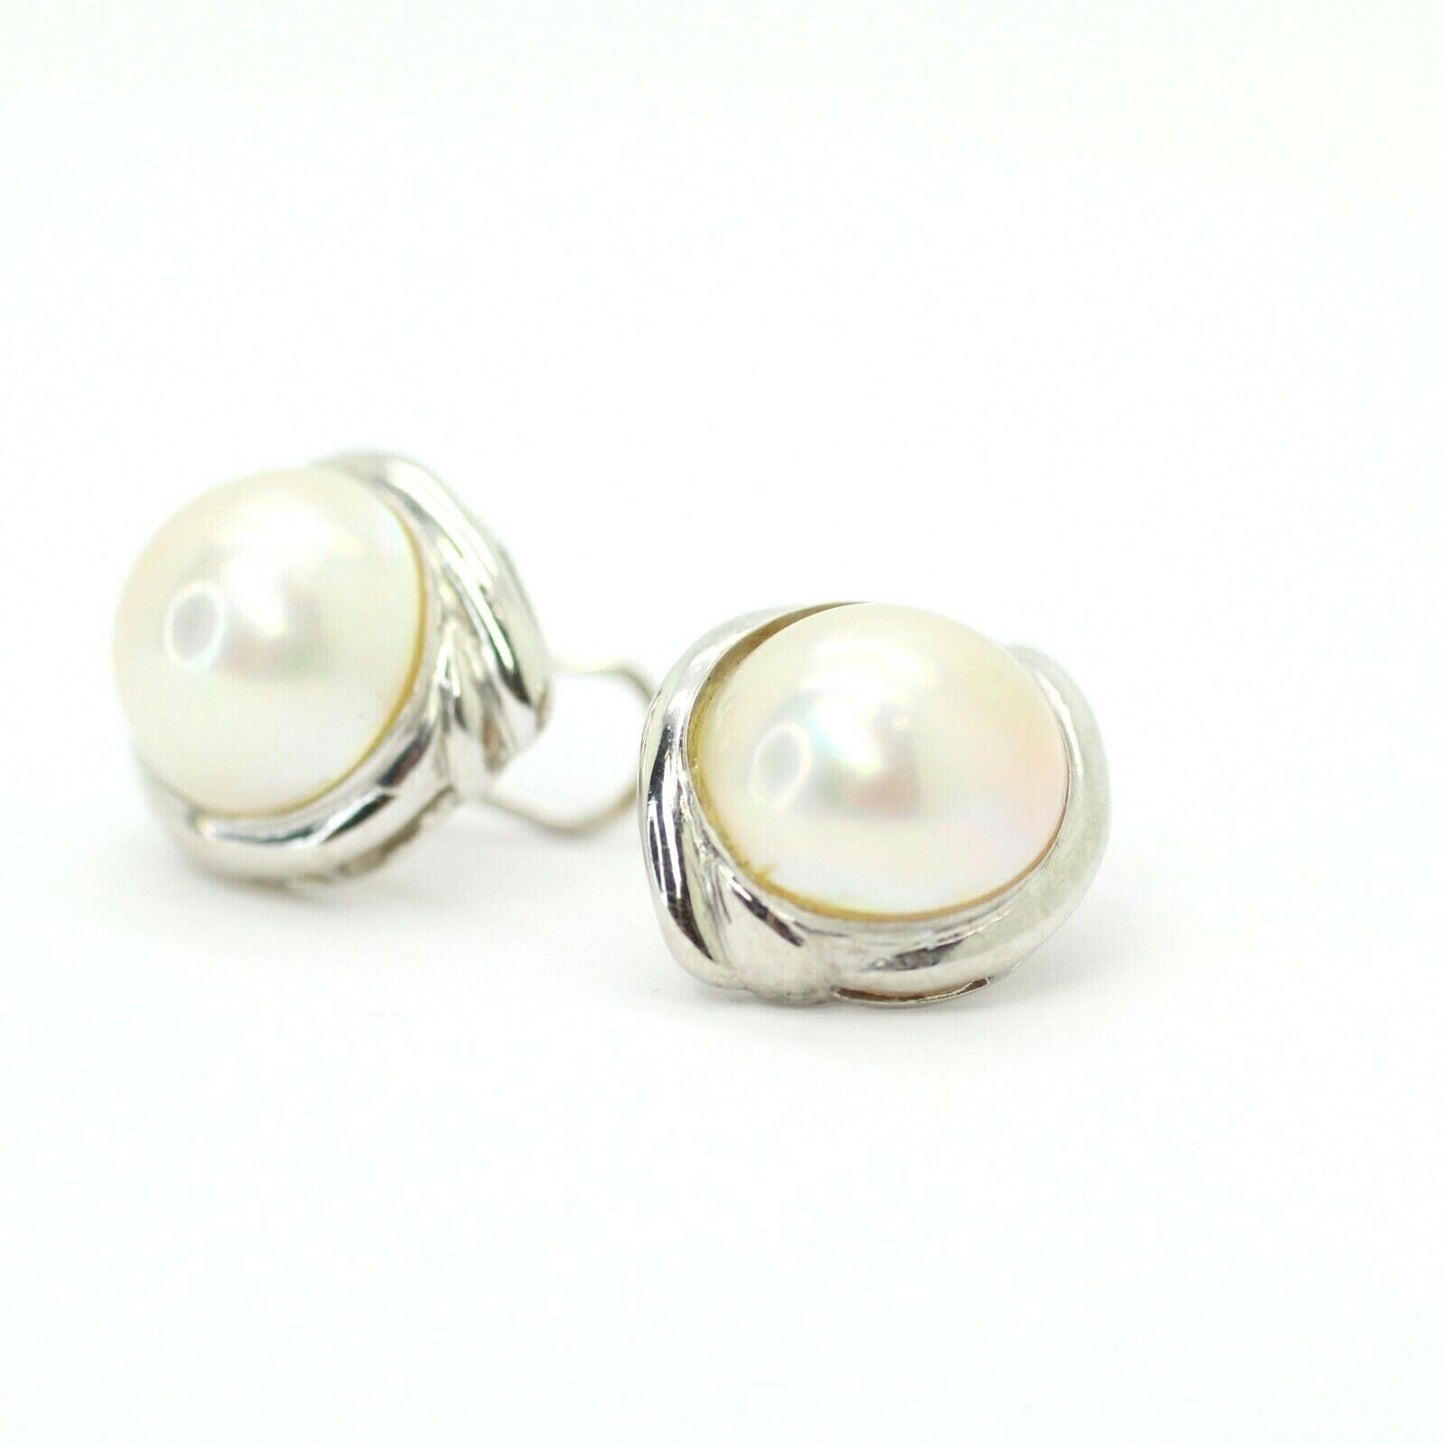 Round Mabe Pearl Clip on Earrings in 14k White Gold